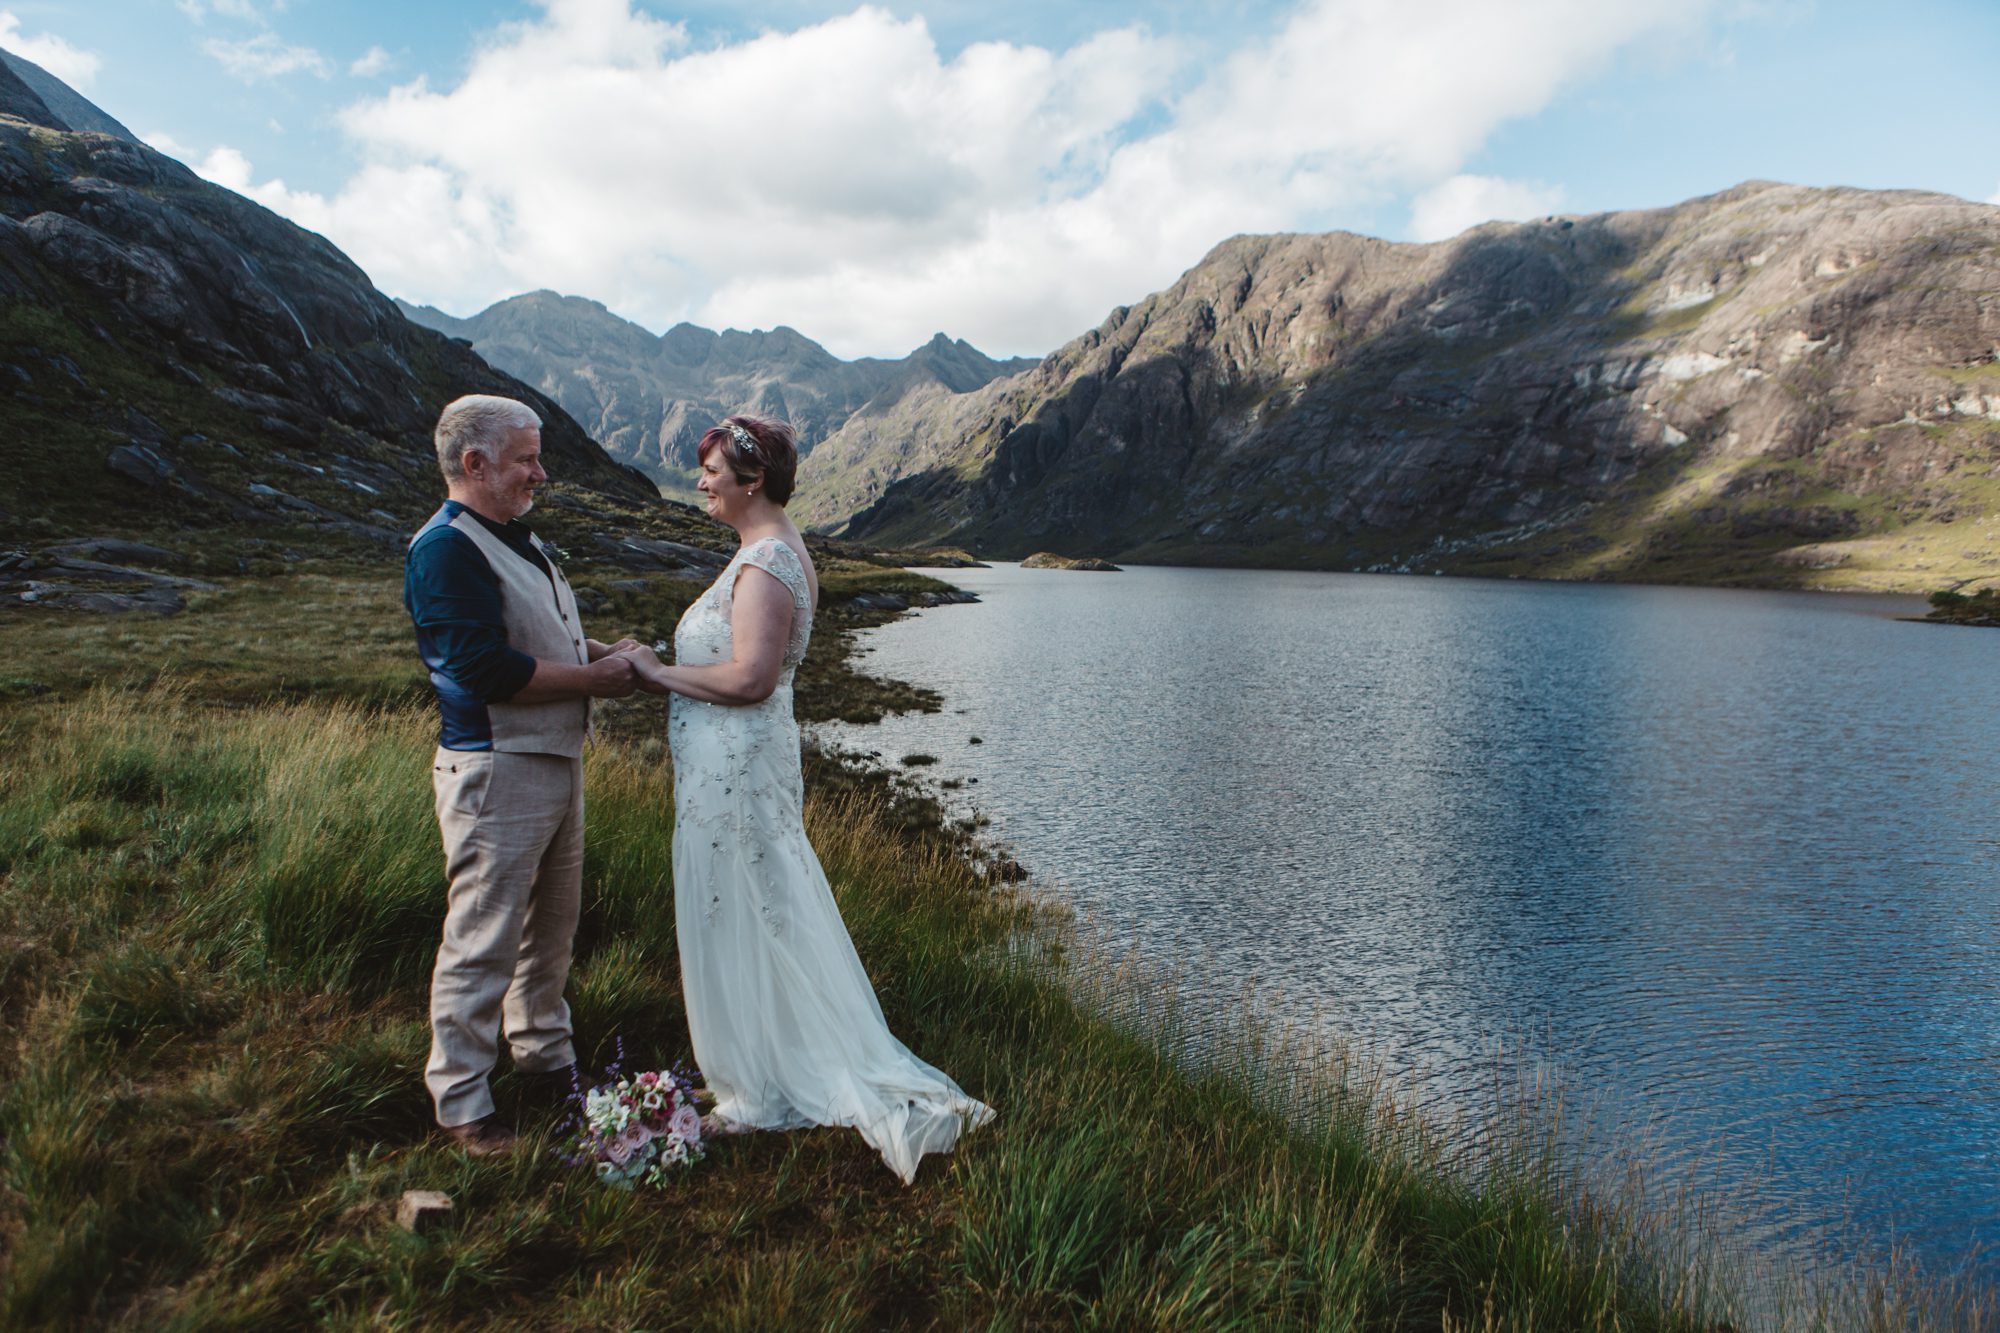 Bride and groom embrace during wedding ceremony loch coruisk